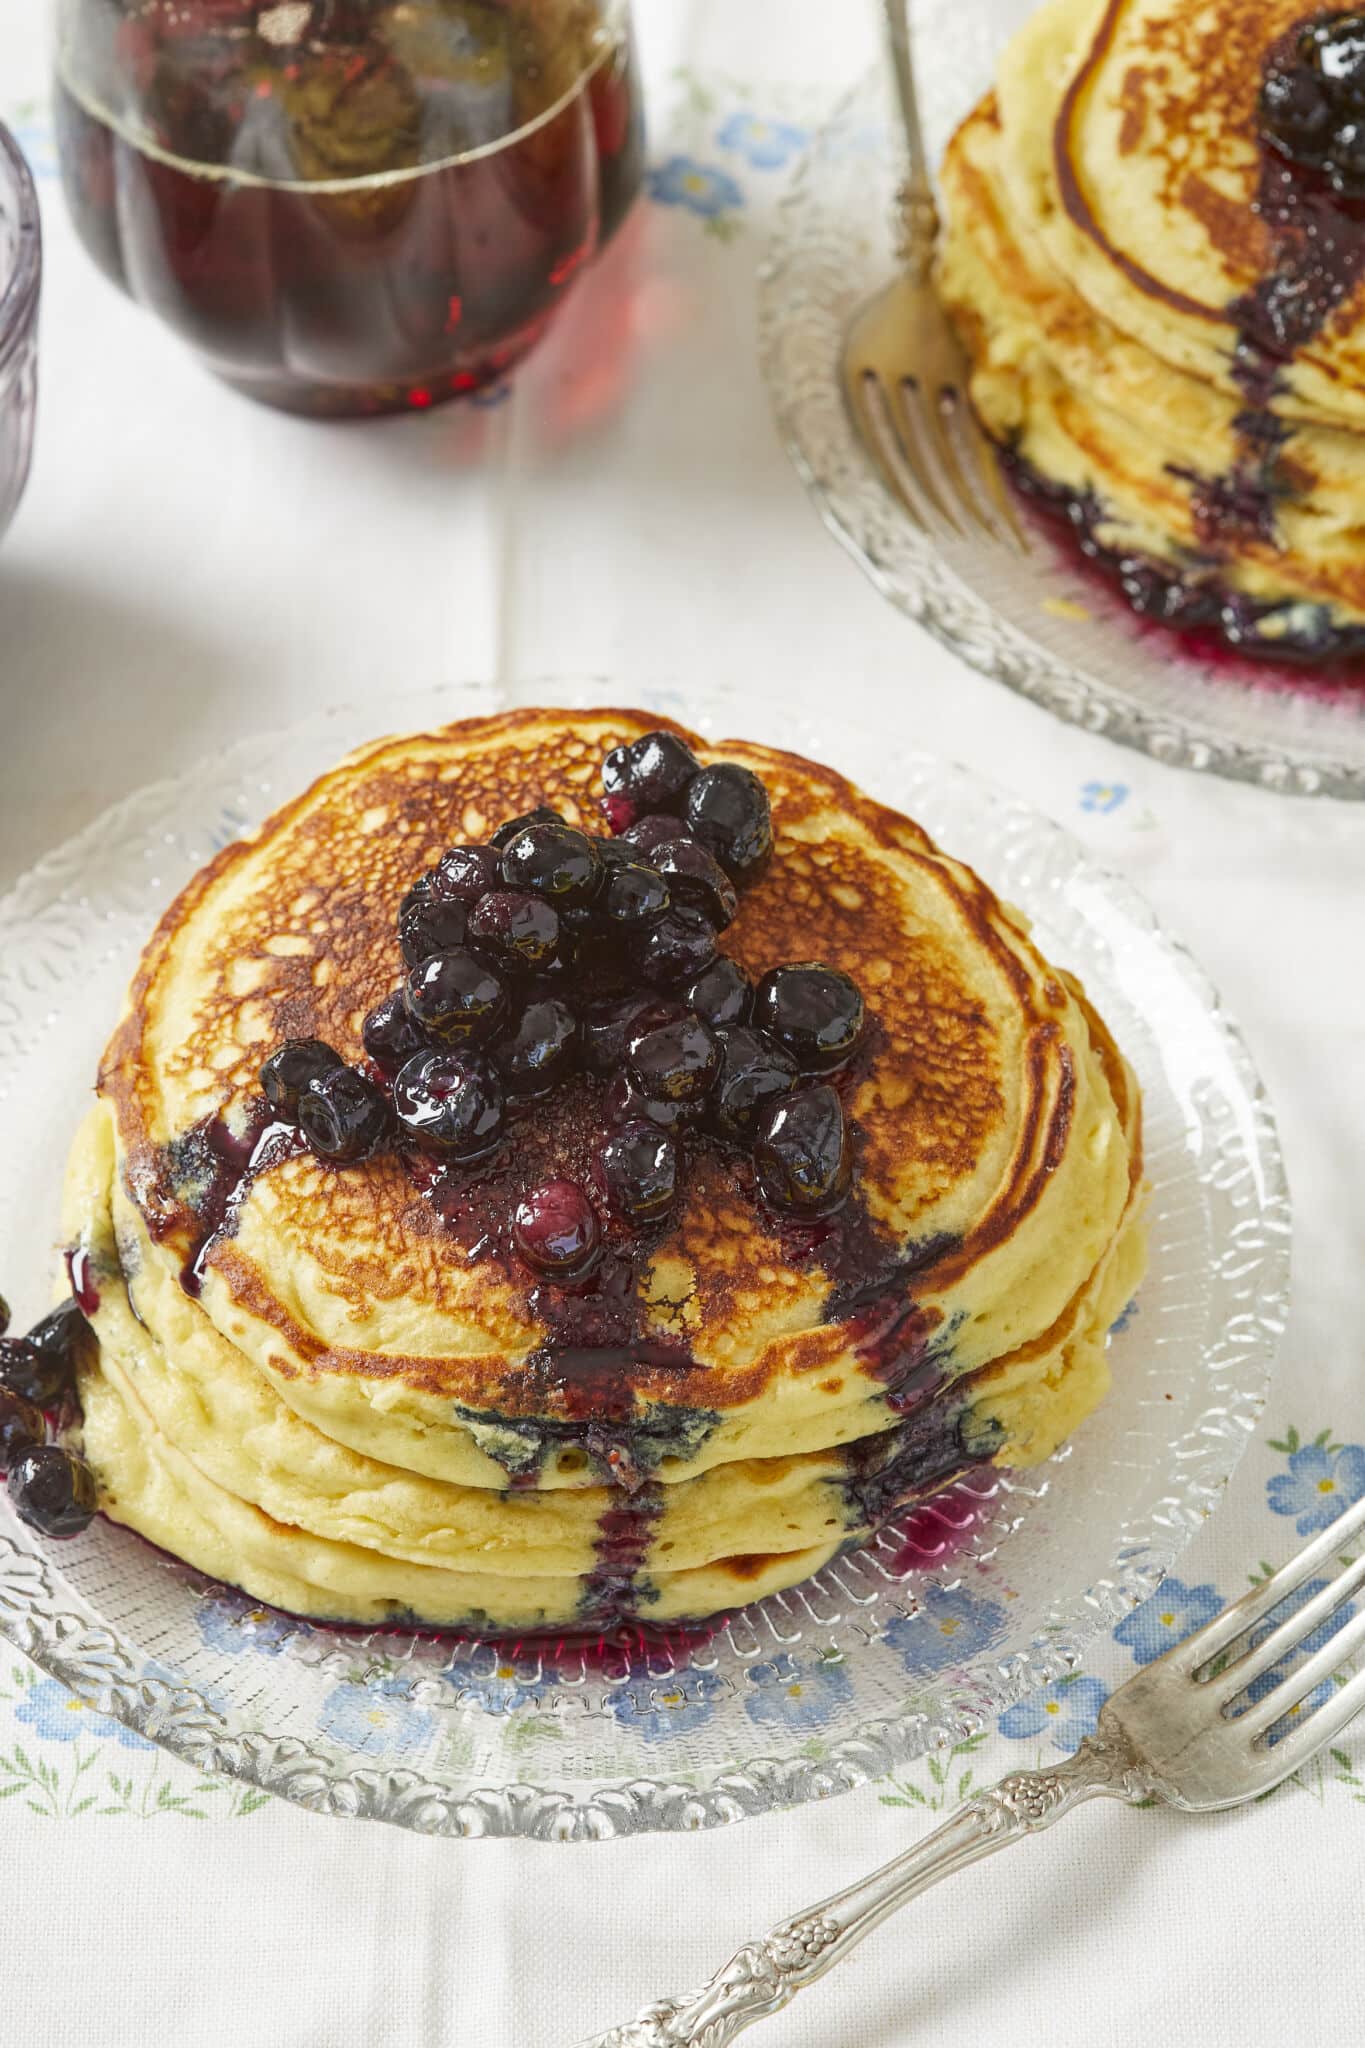 Two stacks of thick, fluffy and soft lemon ricotta pancakes topped with juicy sweet macerated blueberries, served on glass plates and ready to enjoy.